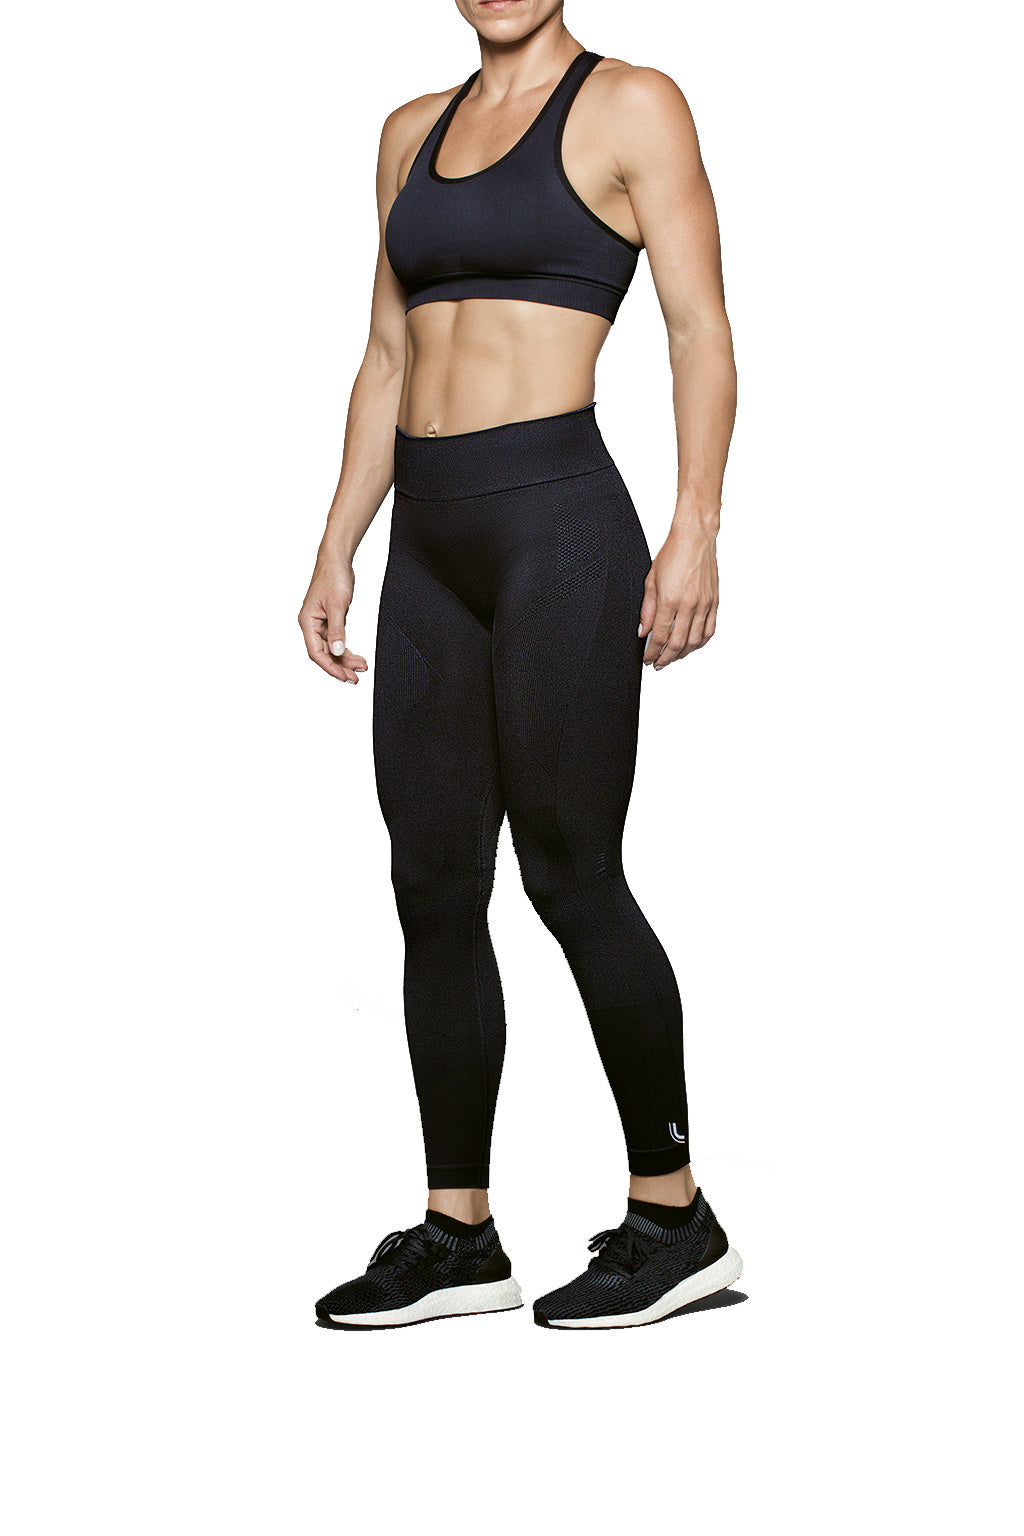 Reebok Womens Highrise Running Compression Athletic Pants, Black